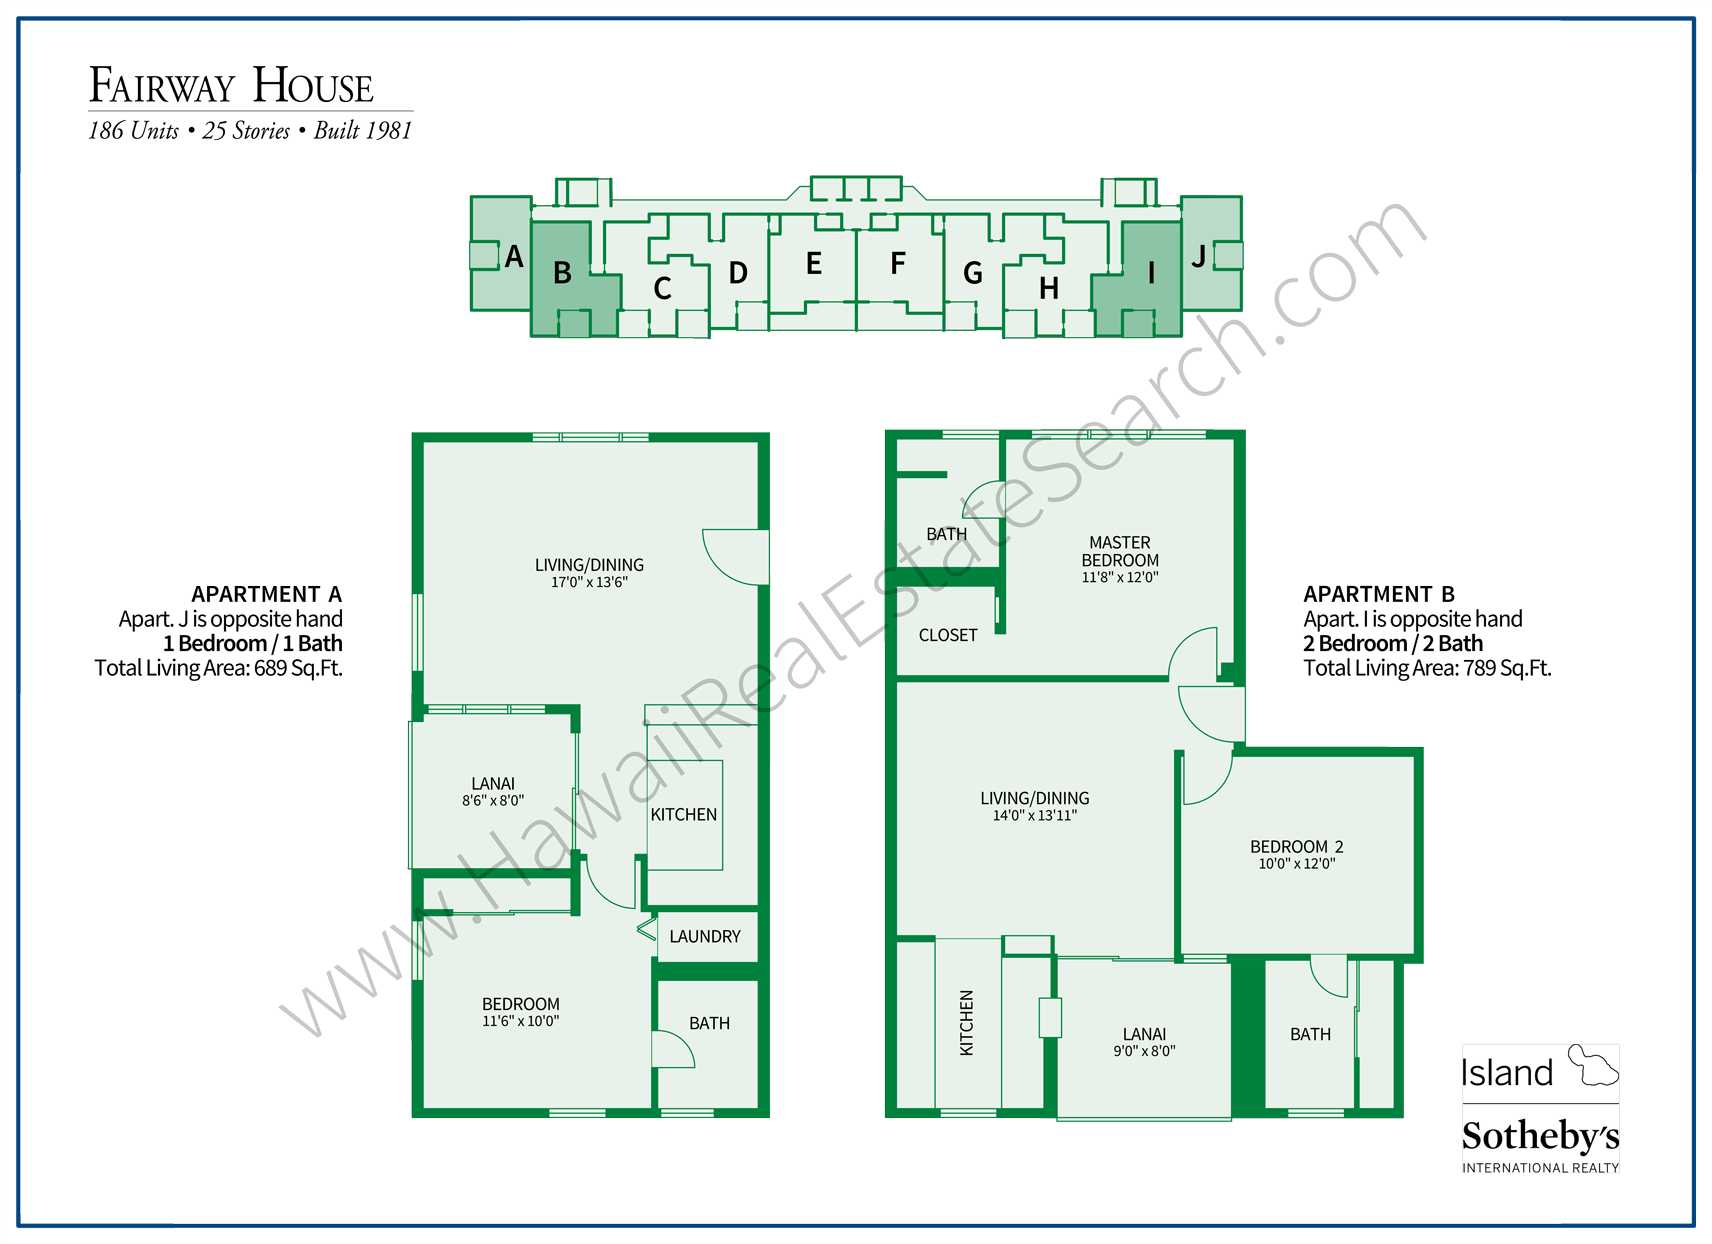 Fairway House Map and Floor Plans